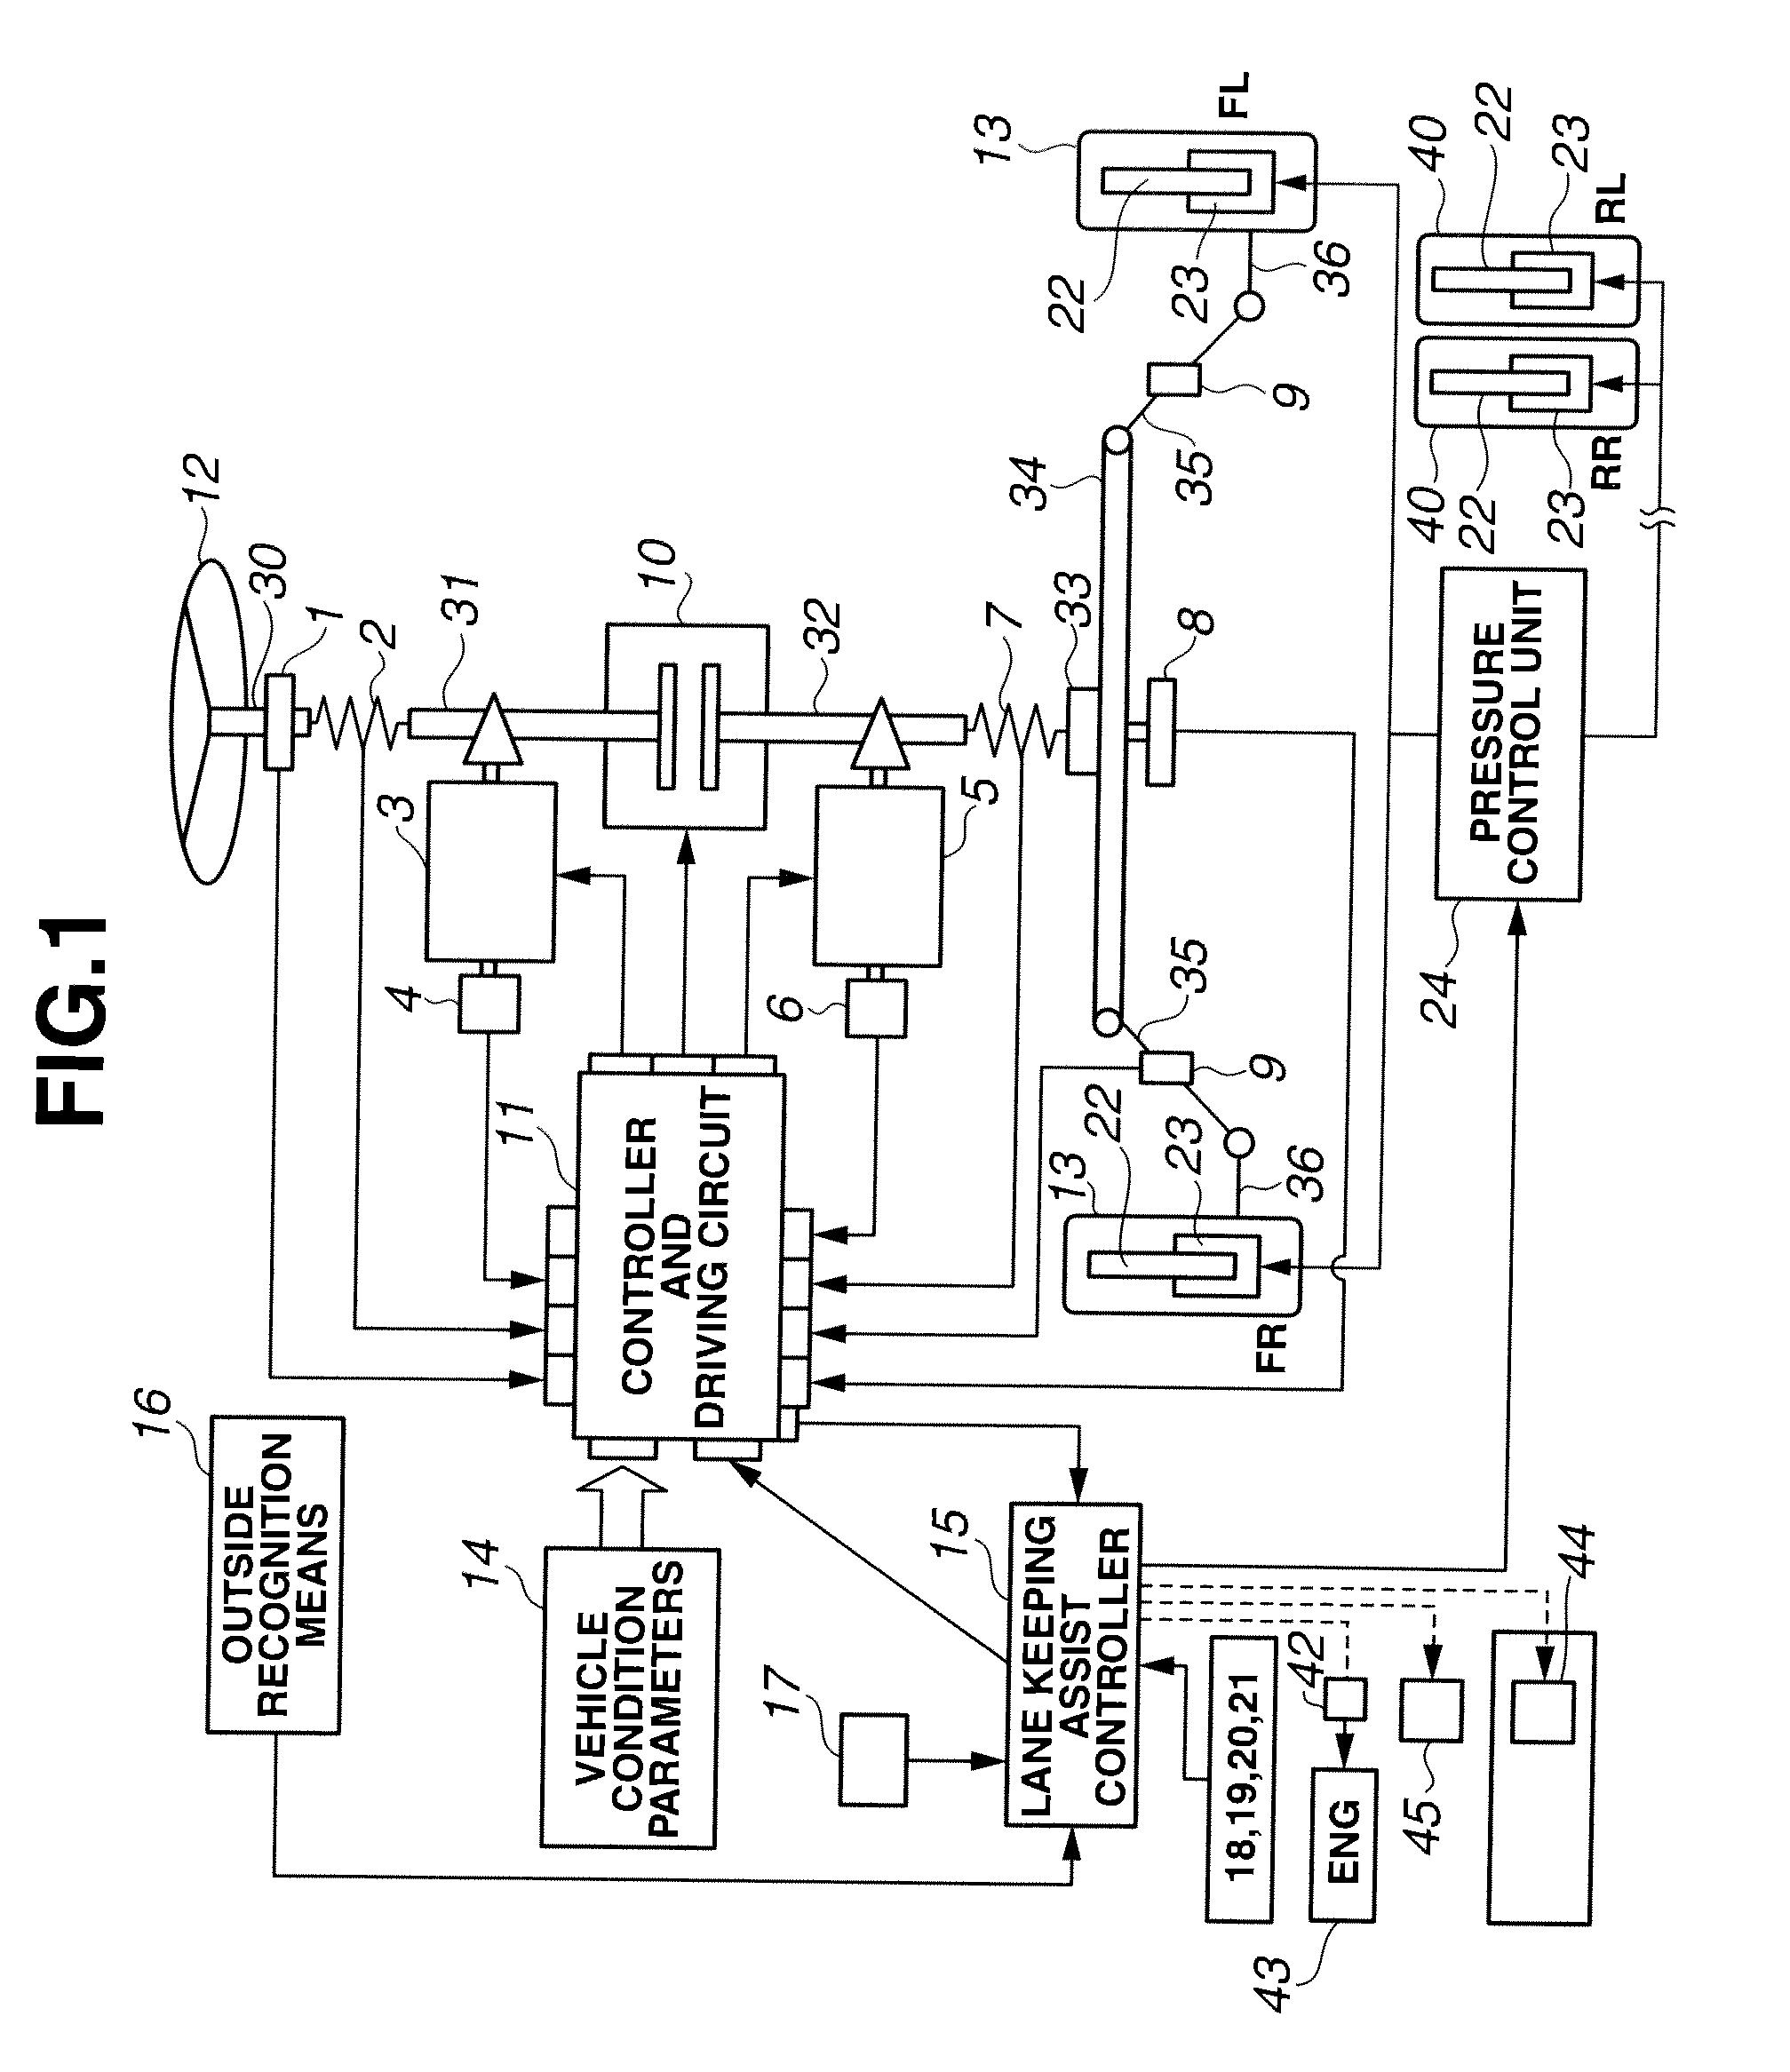 Lane keeping assist device and lane keeping assist method